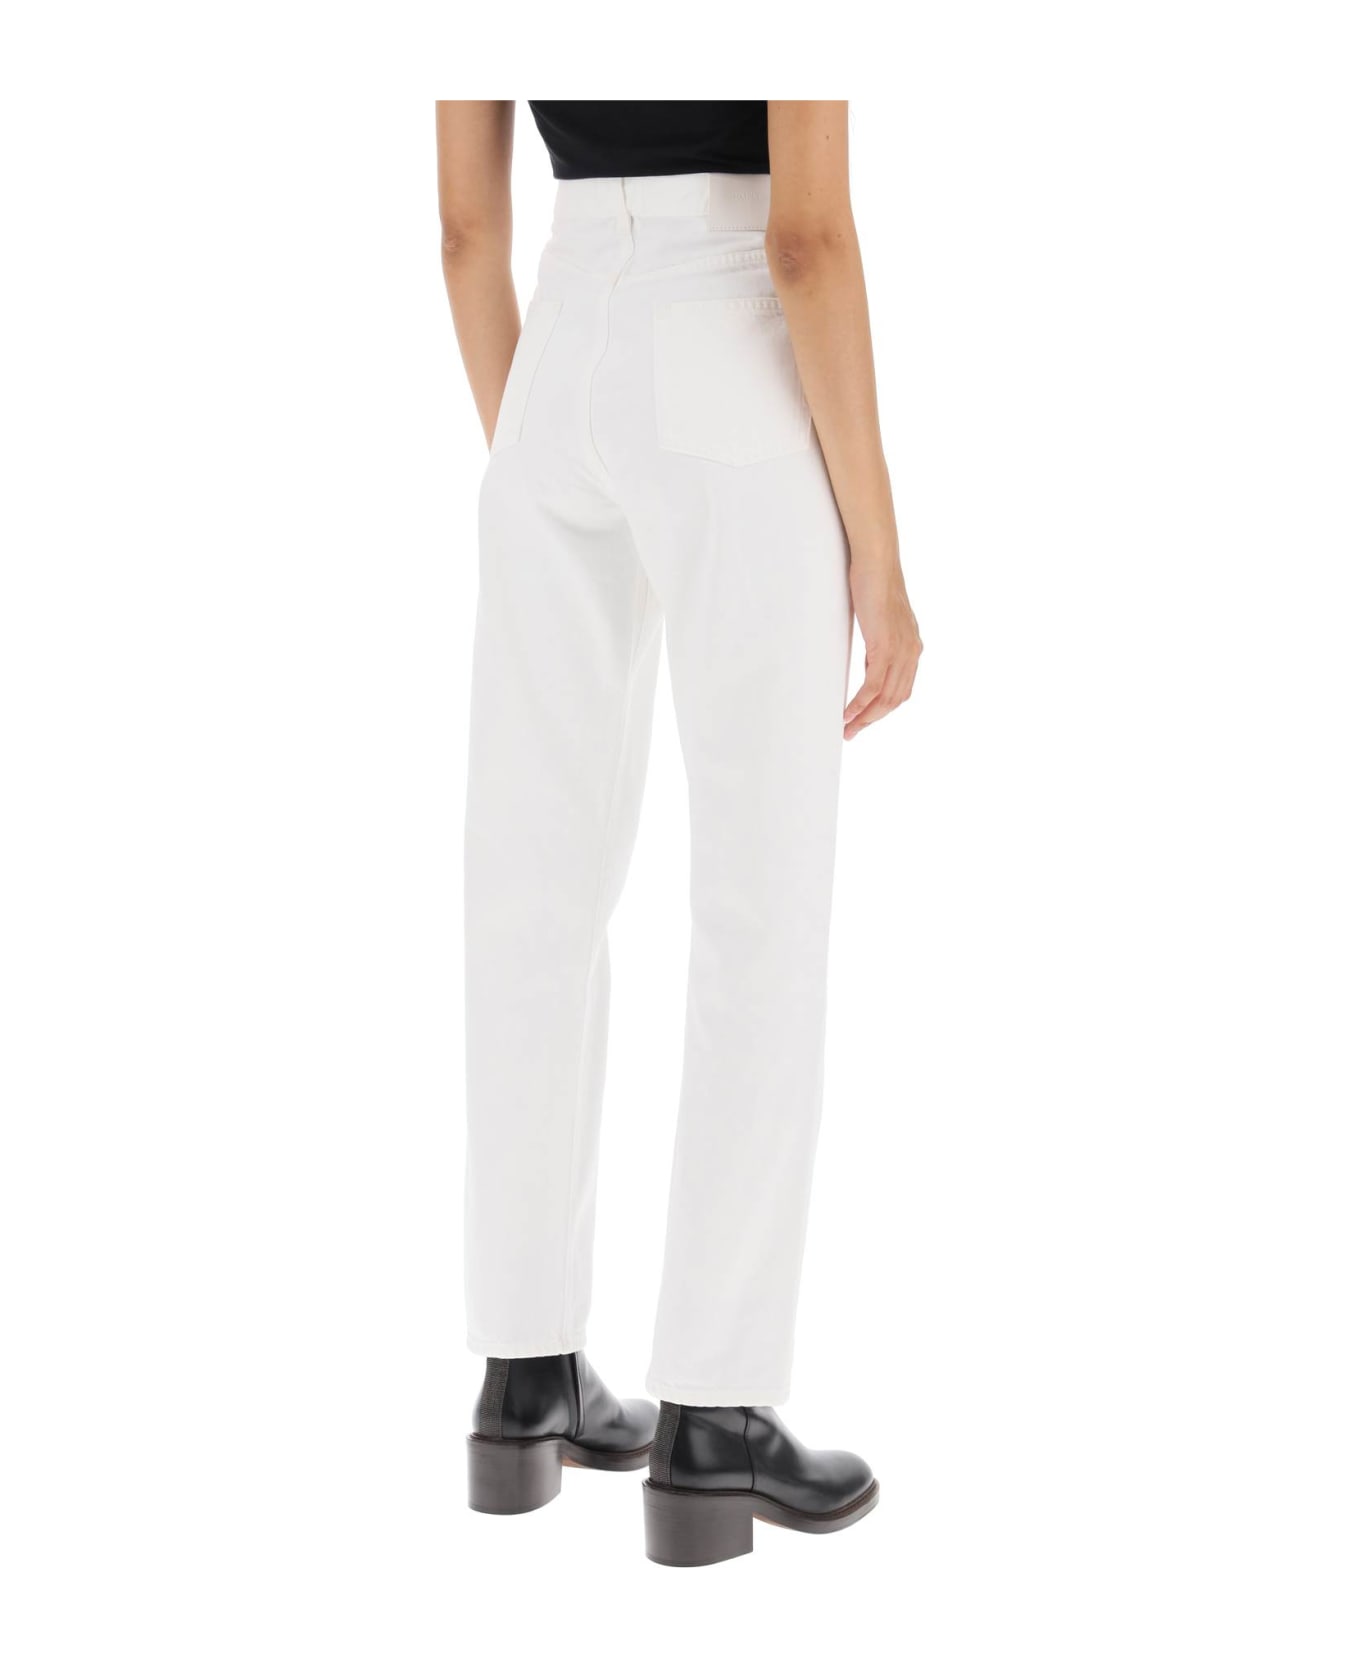 Loulou Studio Cropped Straight Cut Jeans - IVORY (White)